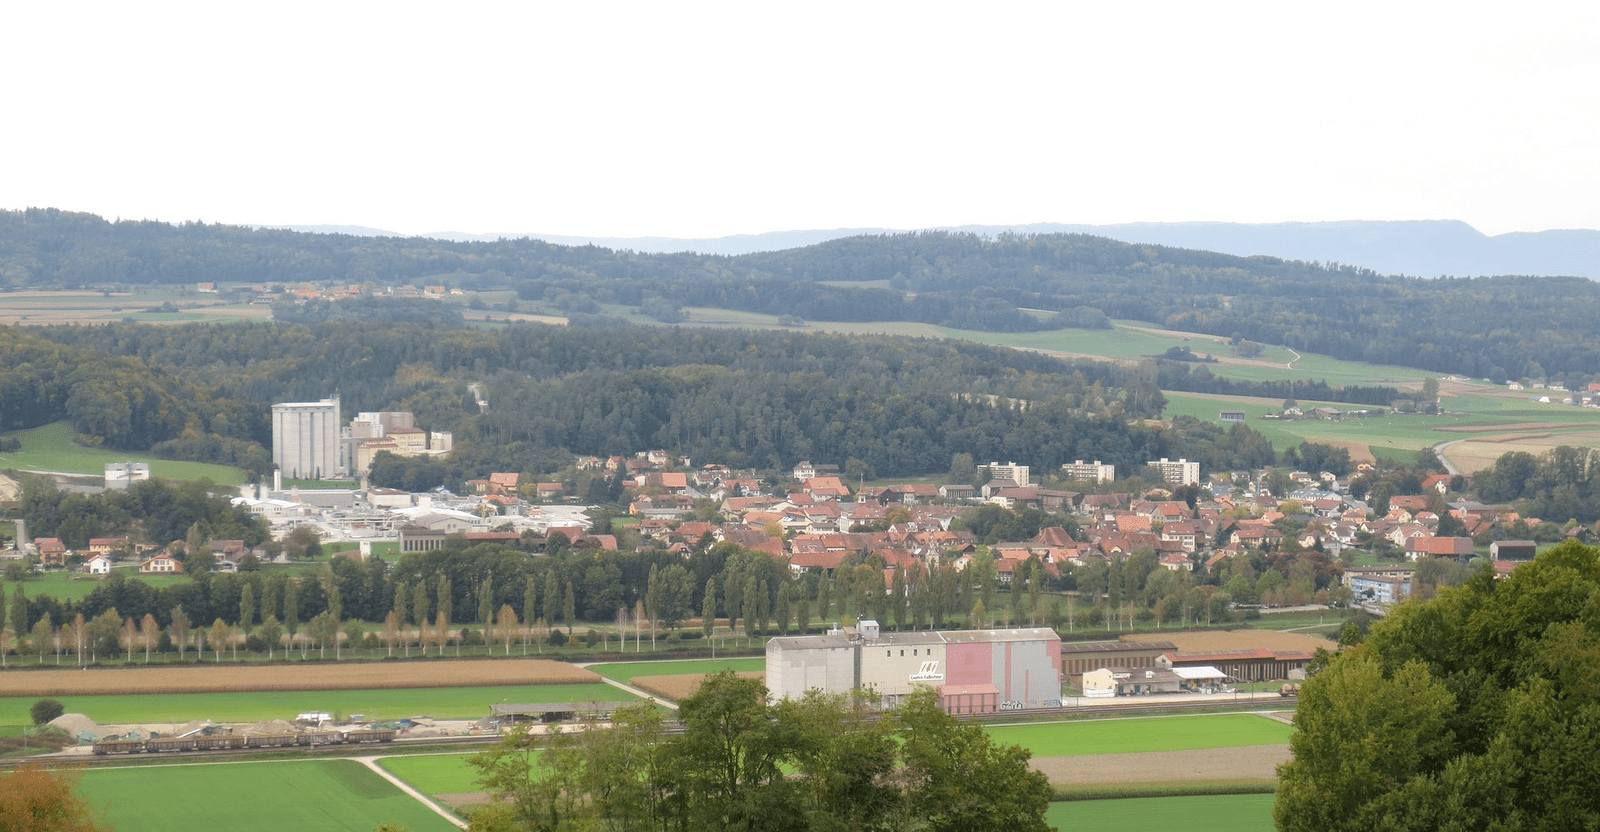 Granges-près-Marnand and Sassel, Valbroye, Canton of Vaud